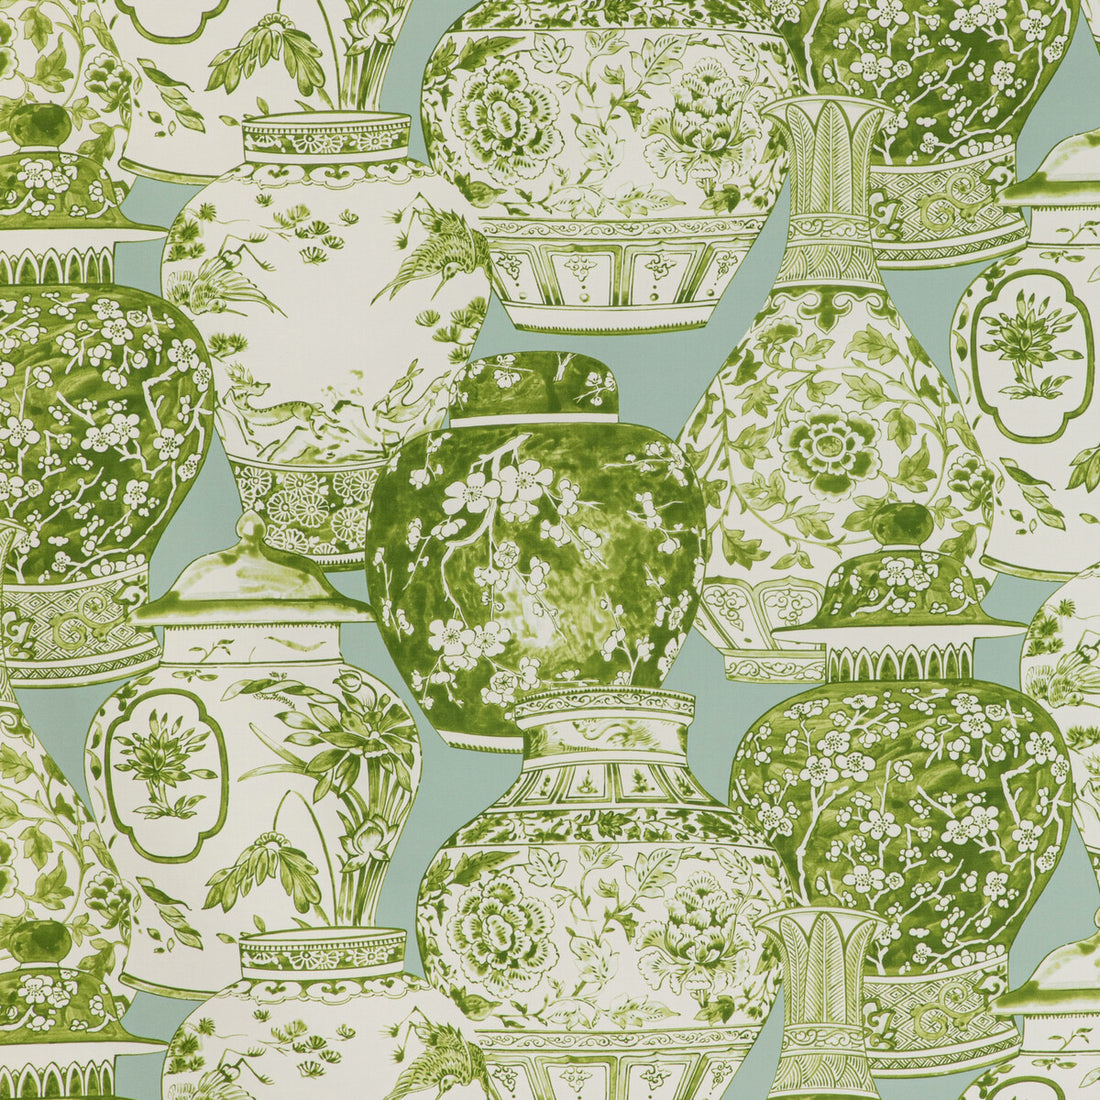 Pandan Print fabric in mist/jade color - pattern 2020194.2313.0 - by Lee Jofa in the Mindoro collection